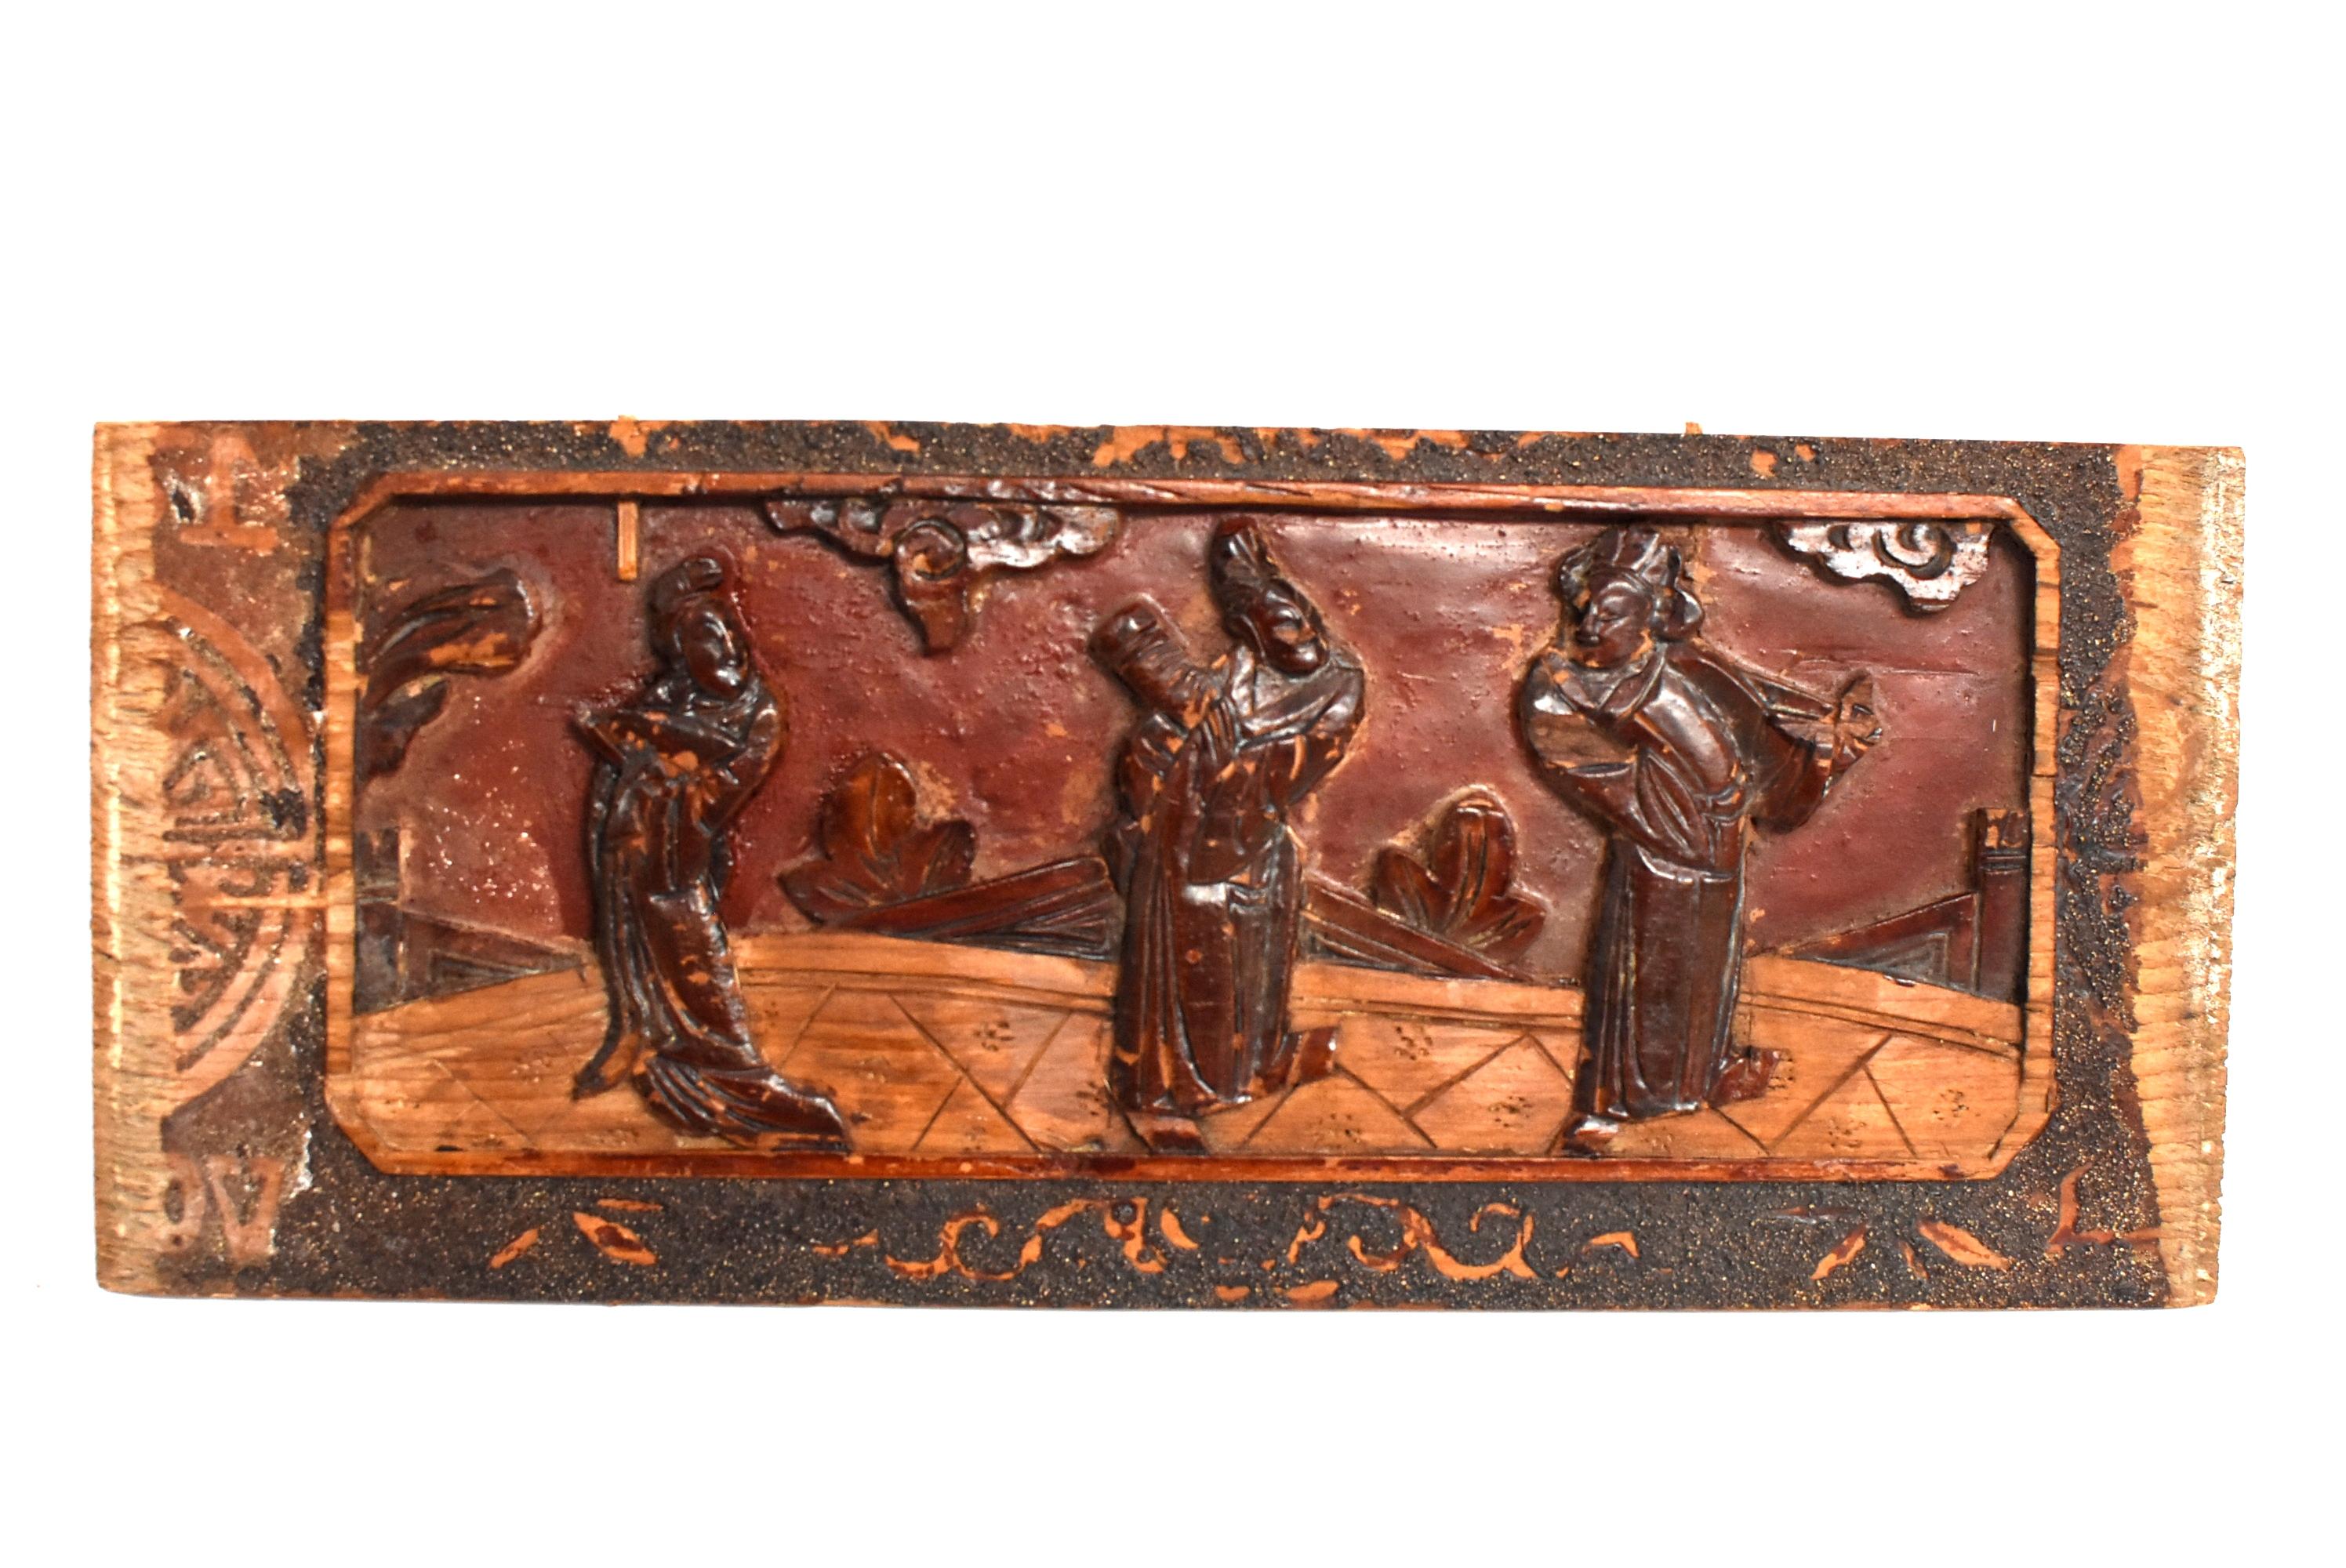 Hand-Carved Antique Wood Carving, Three Scholars